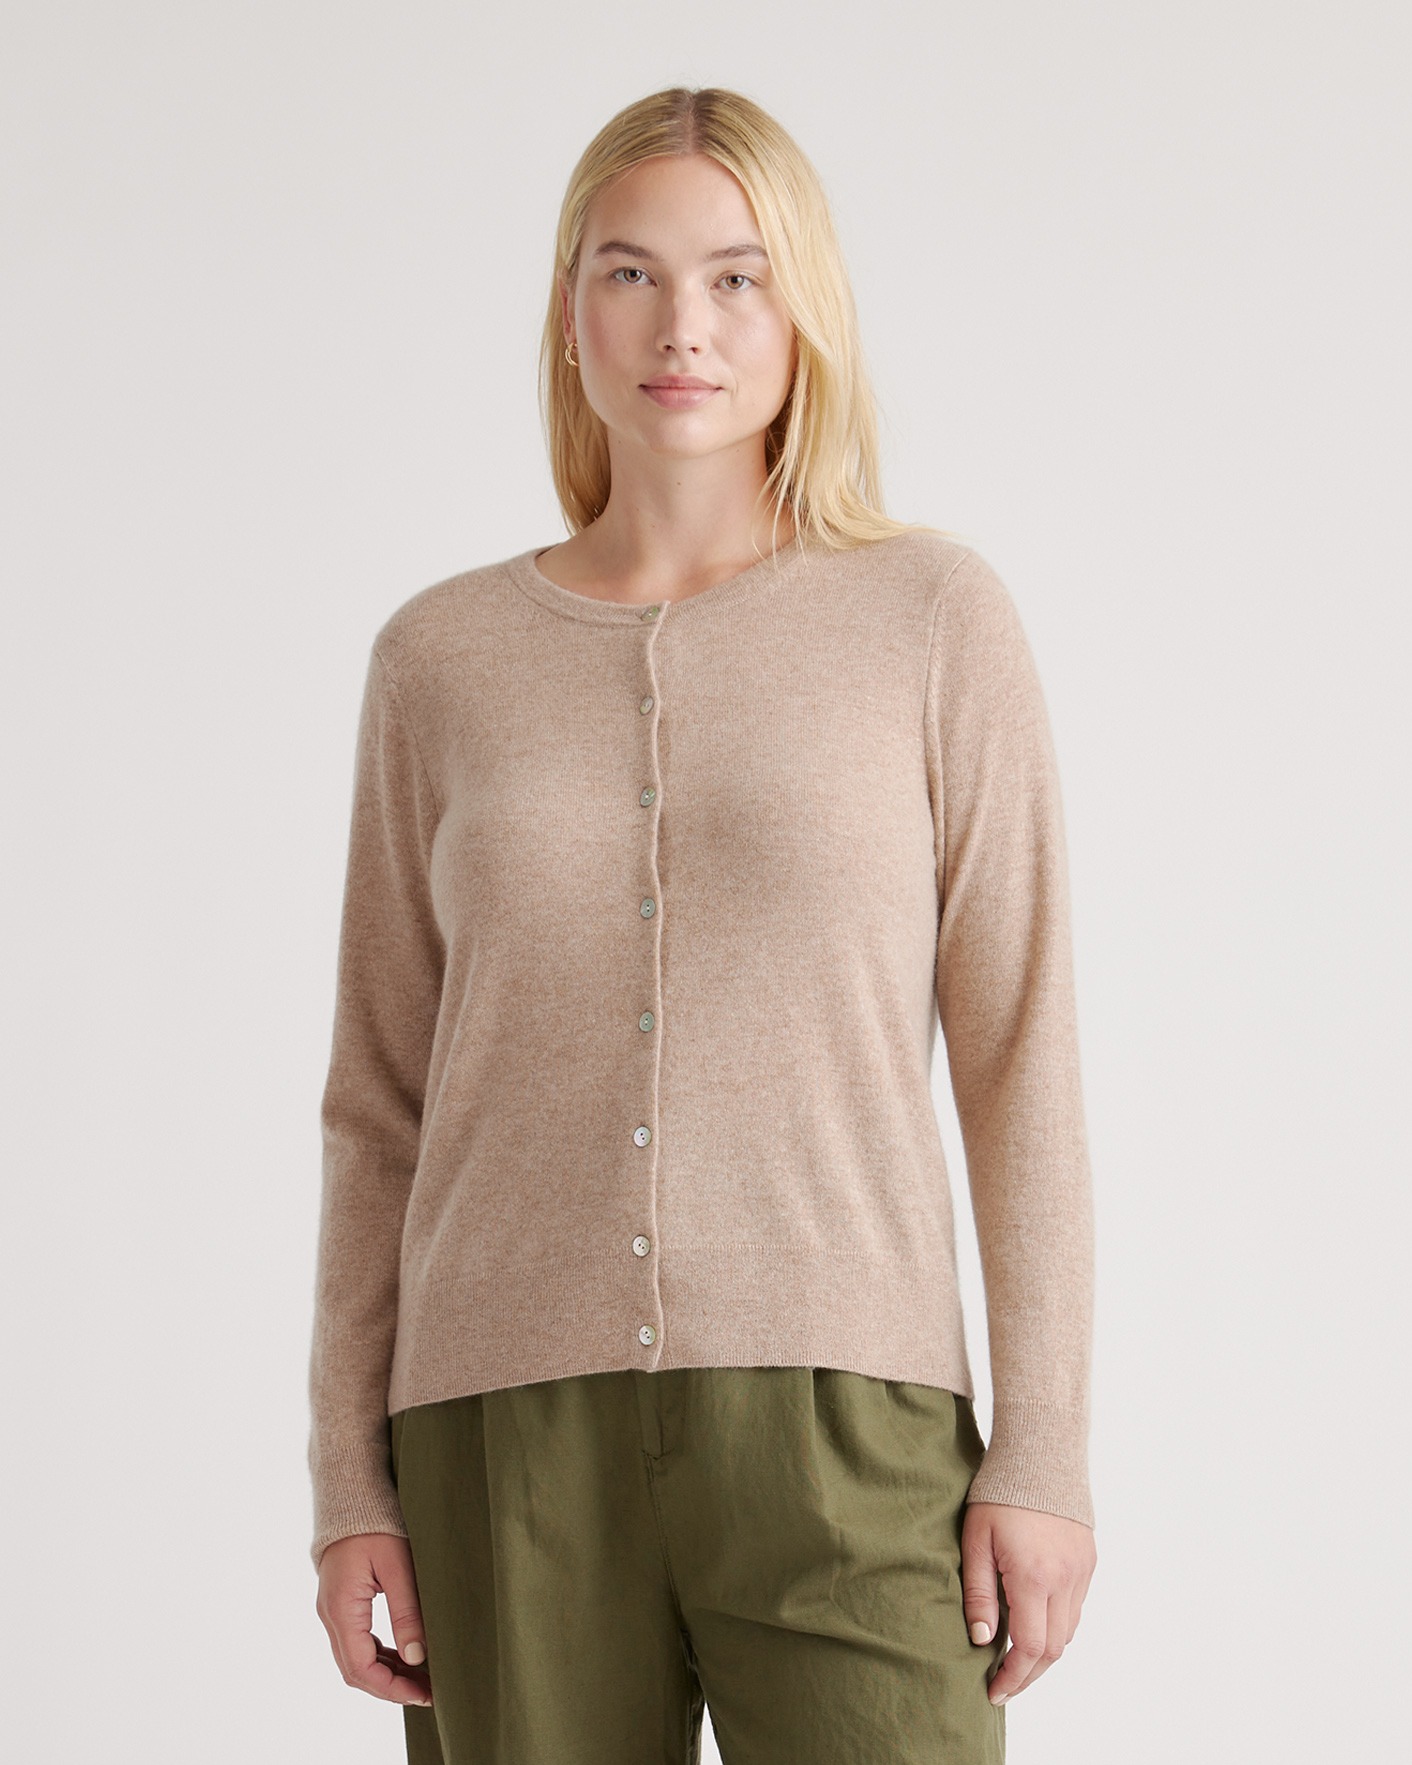 Womens cashmere sweaters, cardigans and more knitwear